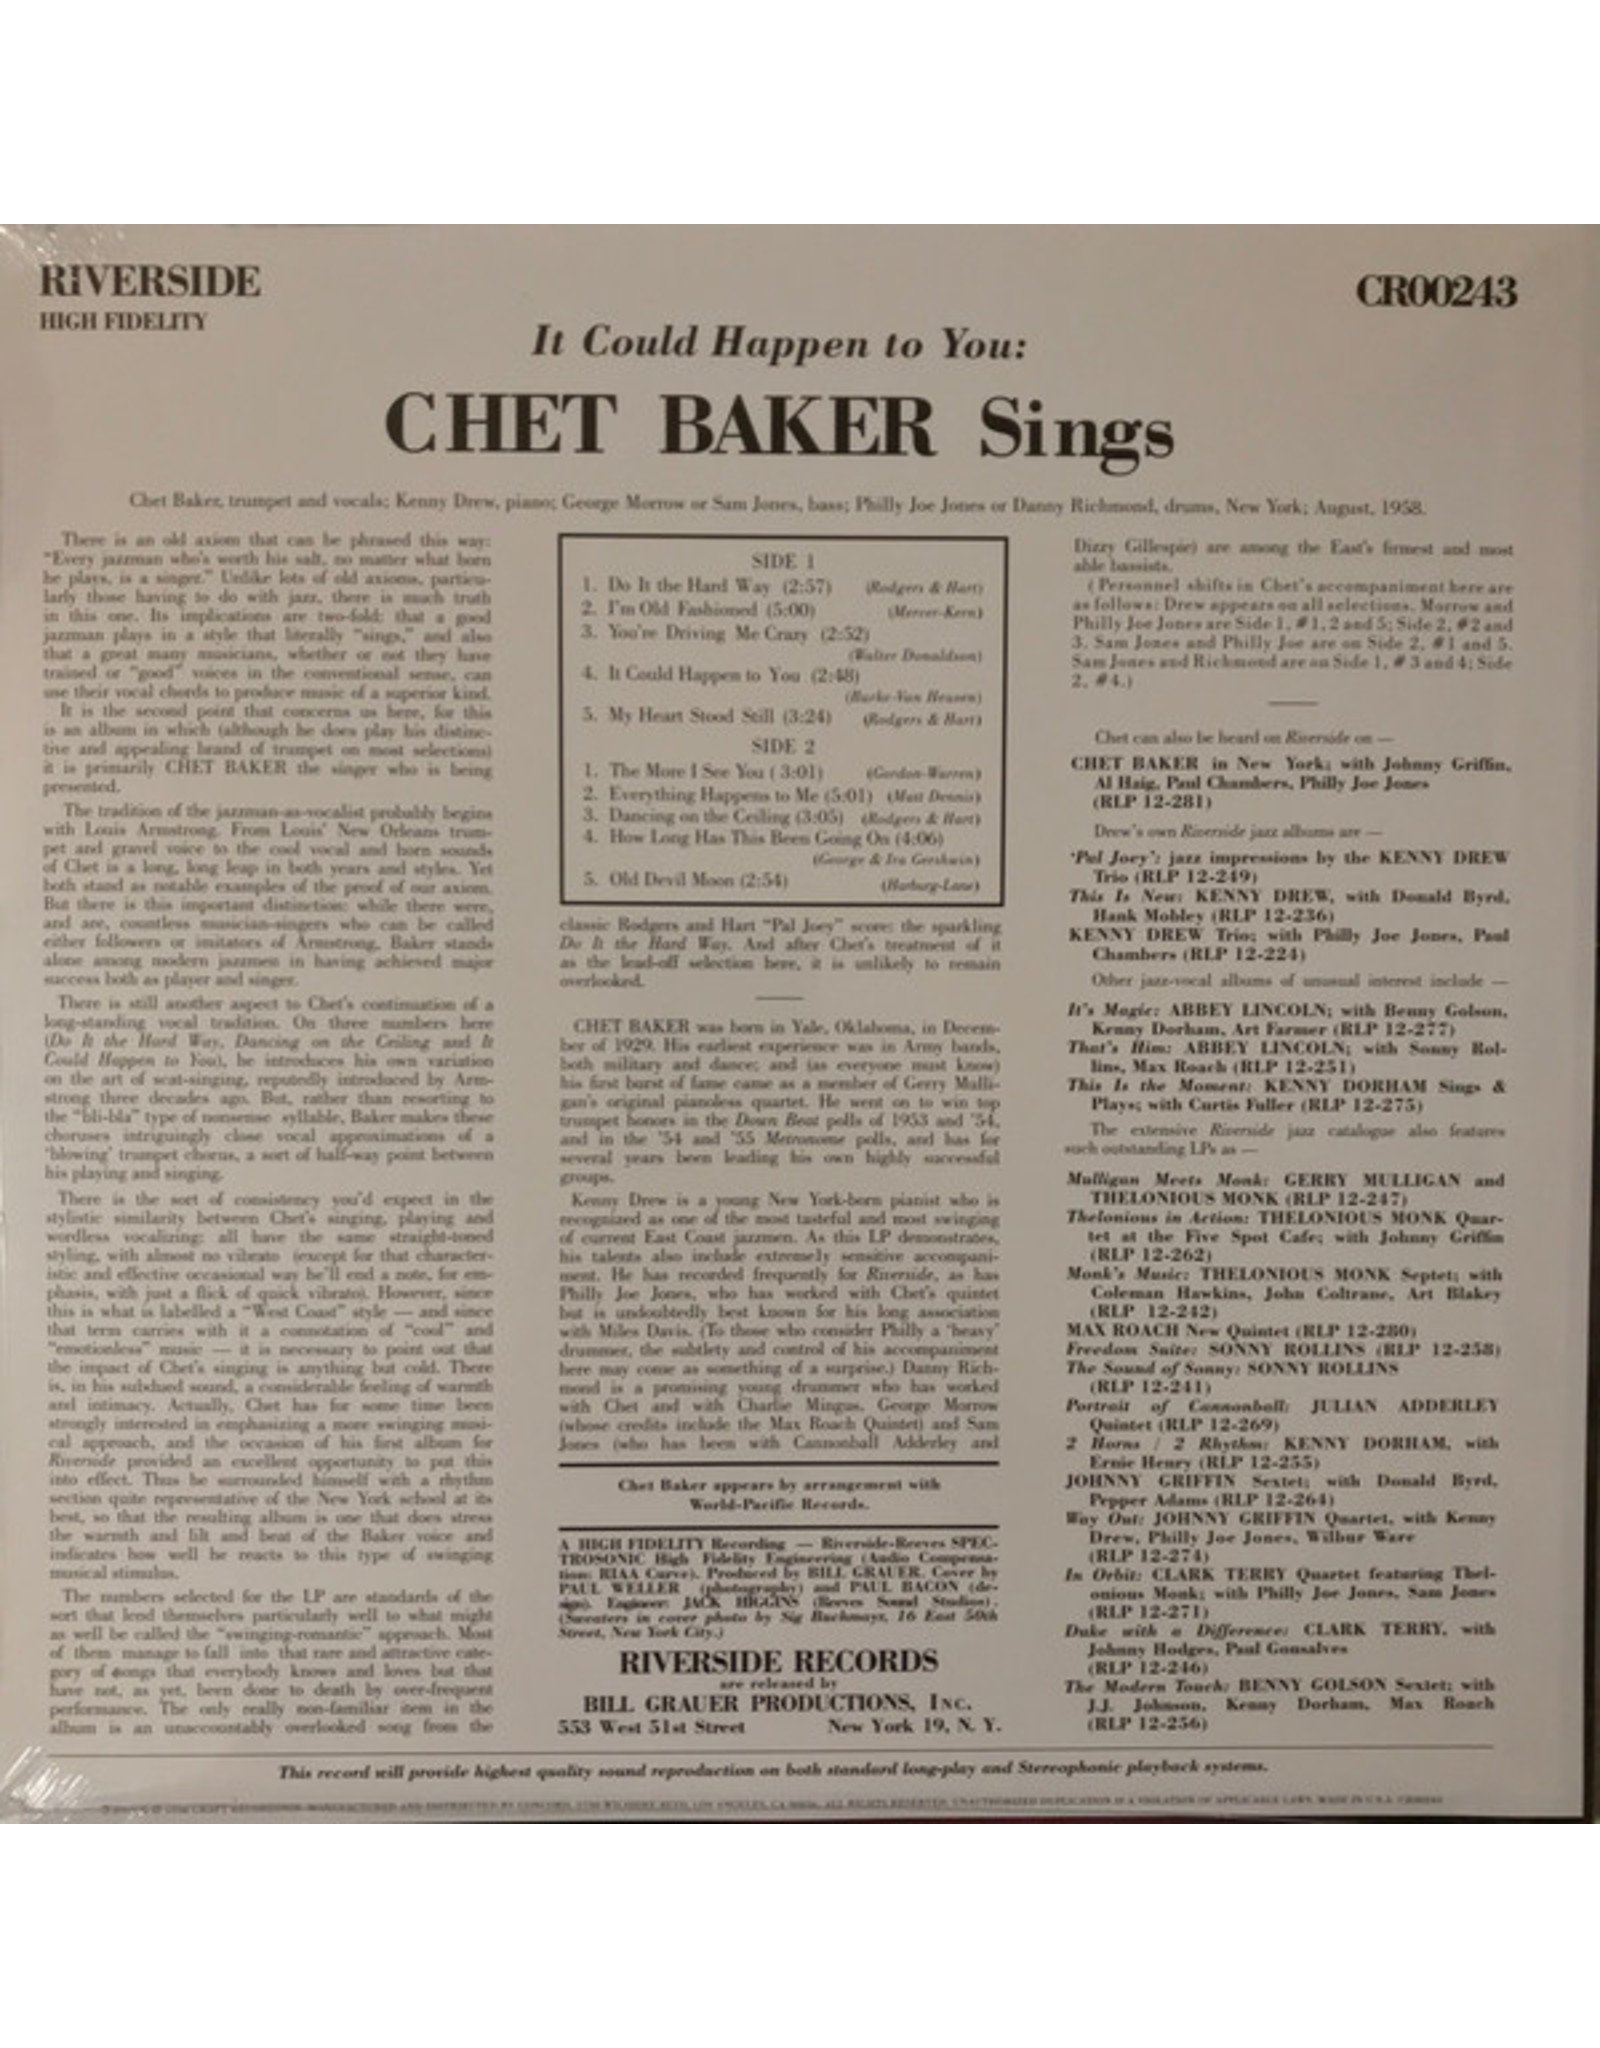 Chet Baker - Sings: It Could Happen To You (2019 Mono Remaster)